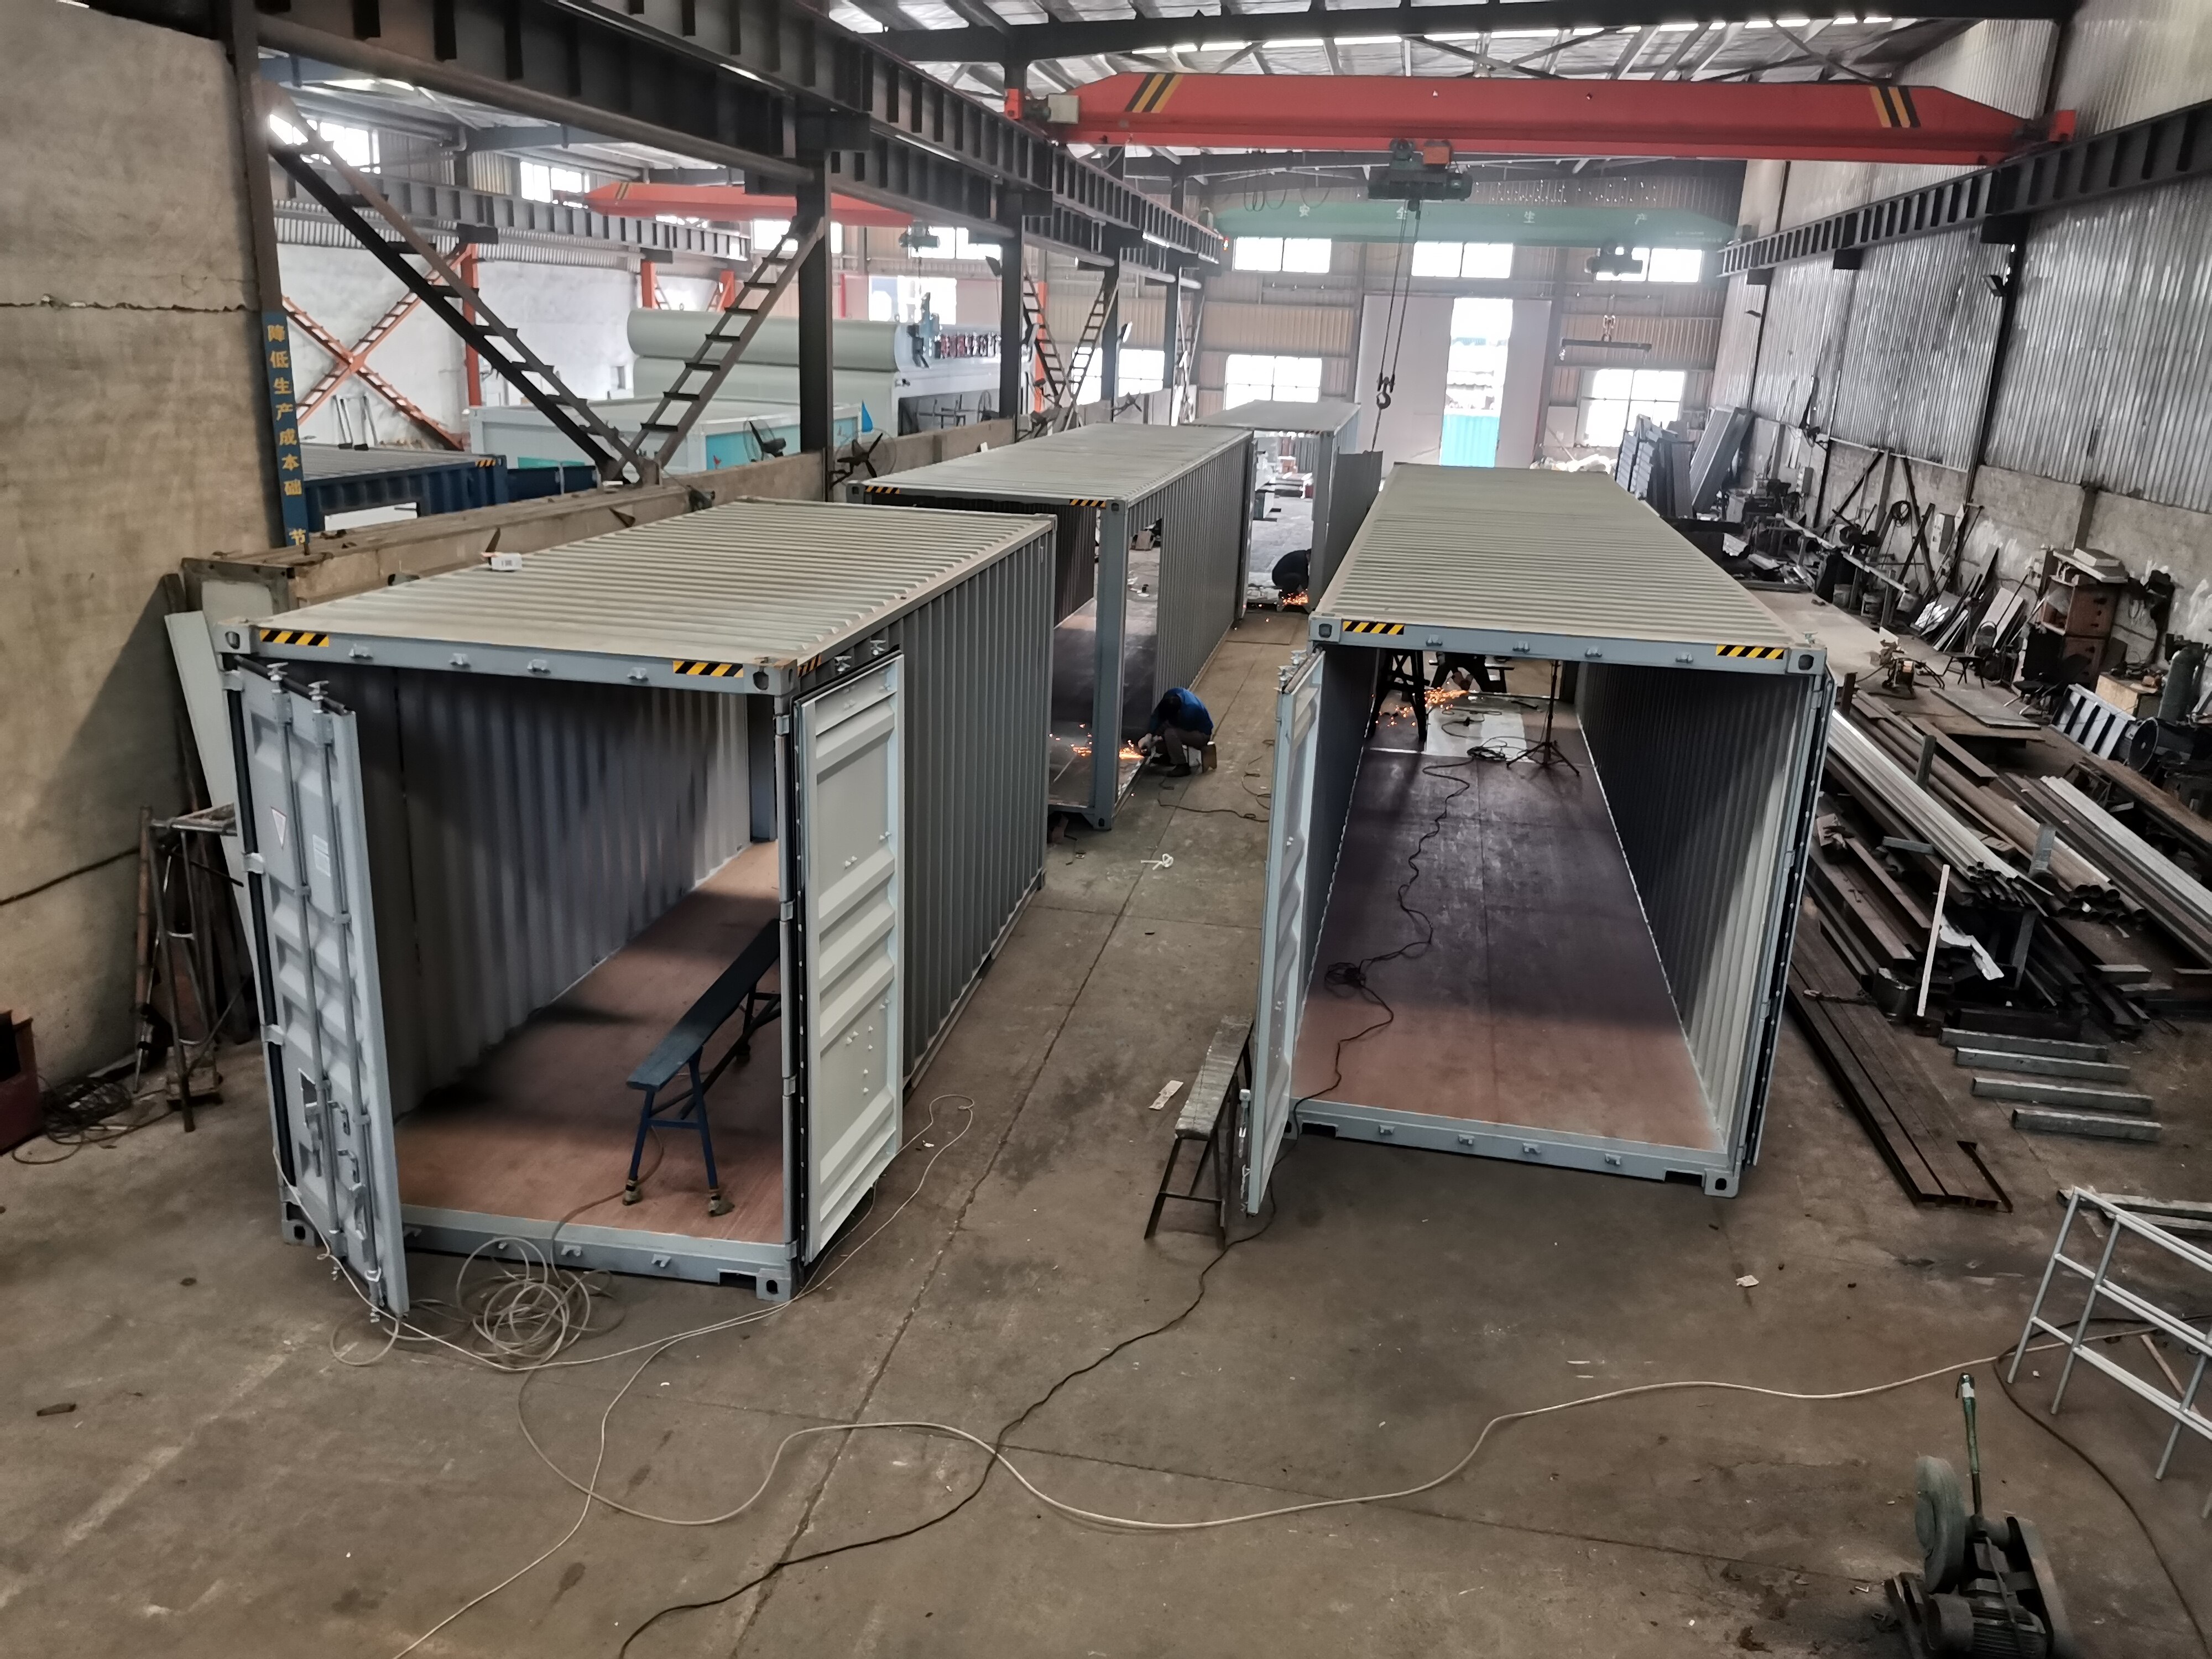 shipping container mobile hospital, modular hospital container ward factory, modular hospital container ward supplier, container hospital design, container hospital mobile